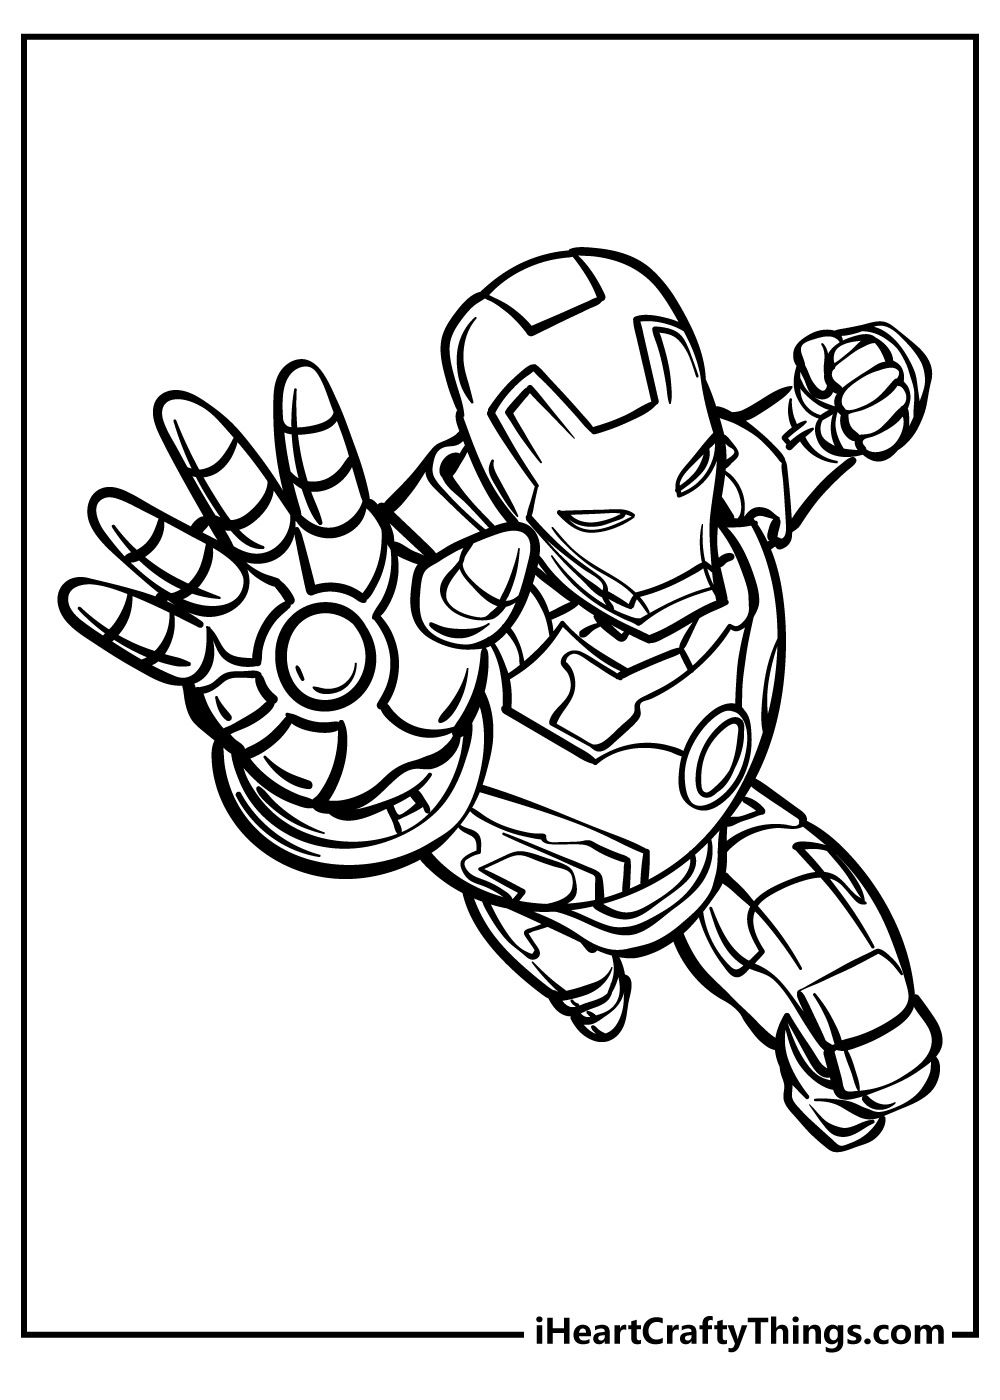 Avengers coloring pages free printables